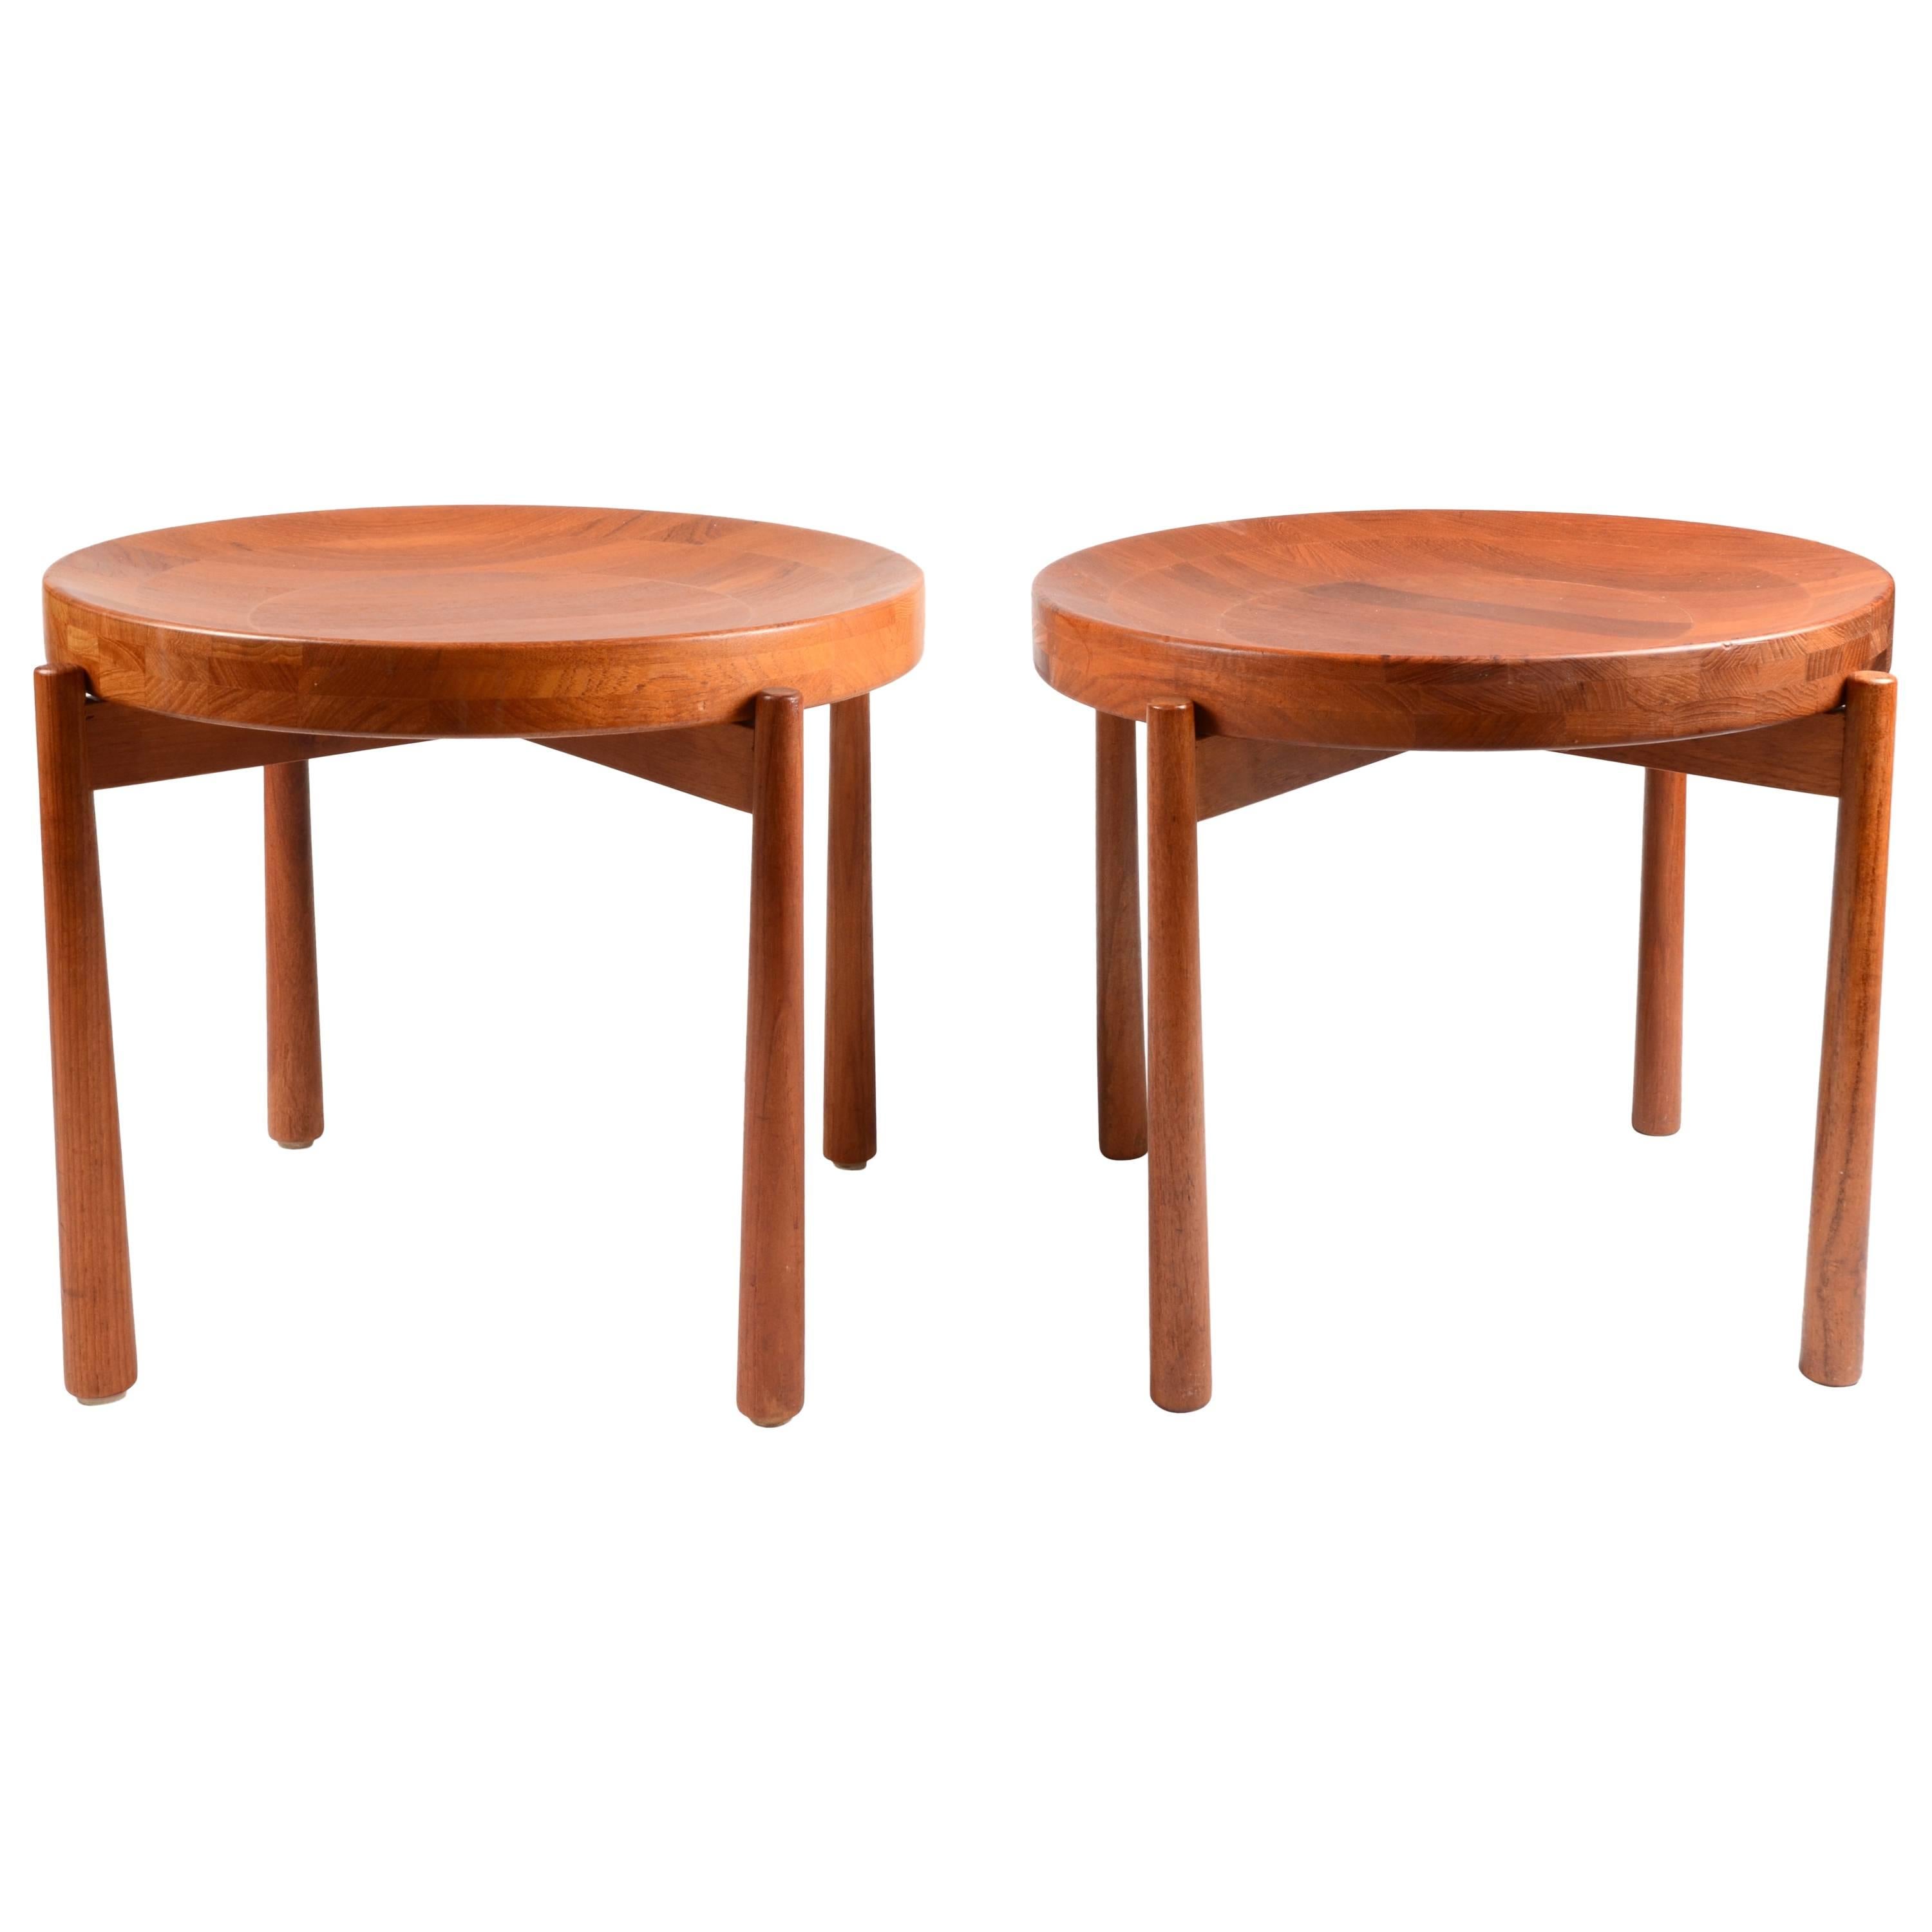 Pair of Tray Tables, in the Style of Jens Quistgaard, Denmark, Mid-1900s For Sale